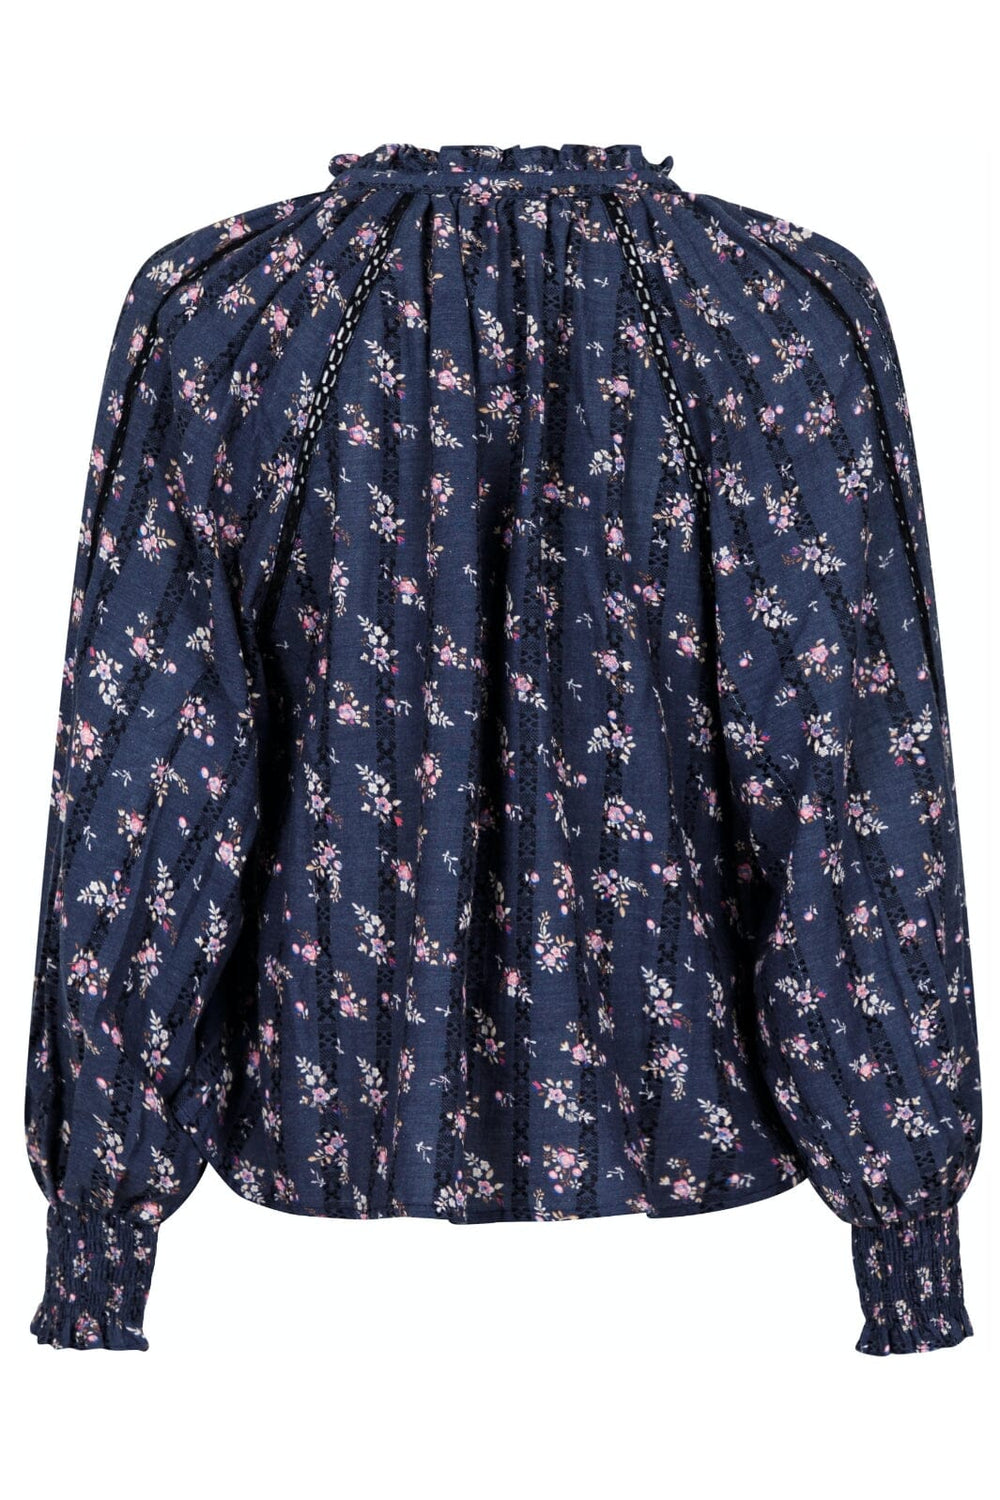 Neo Noir - Stimma Delicate Floral Blouse - Dusty Navy Bluser 